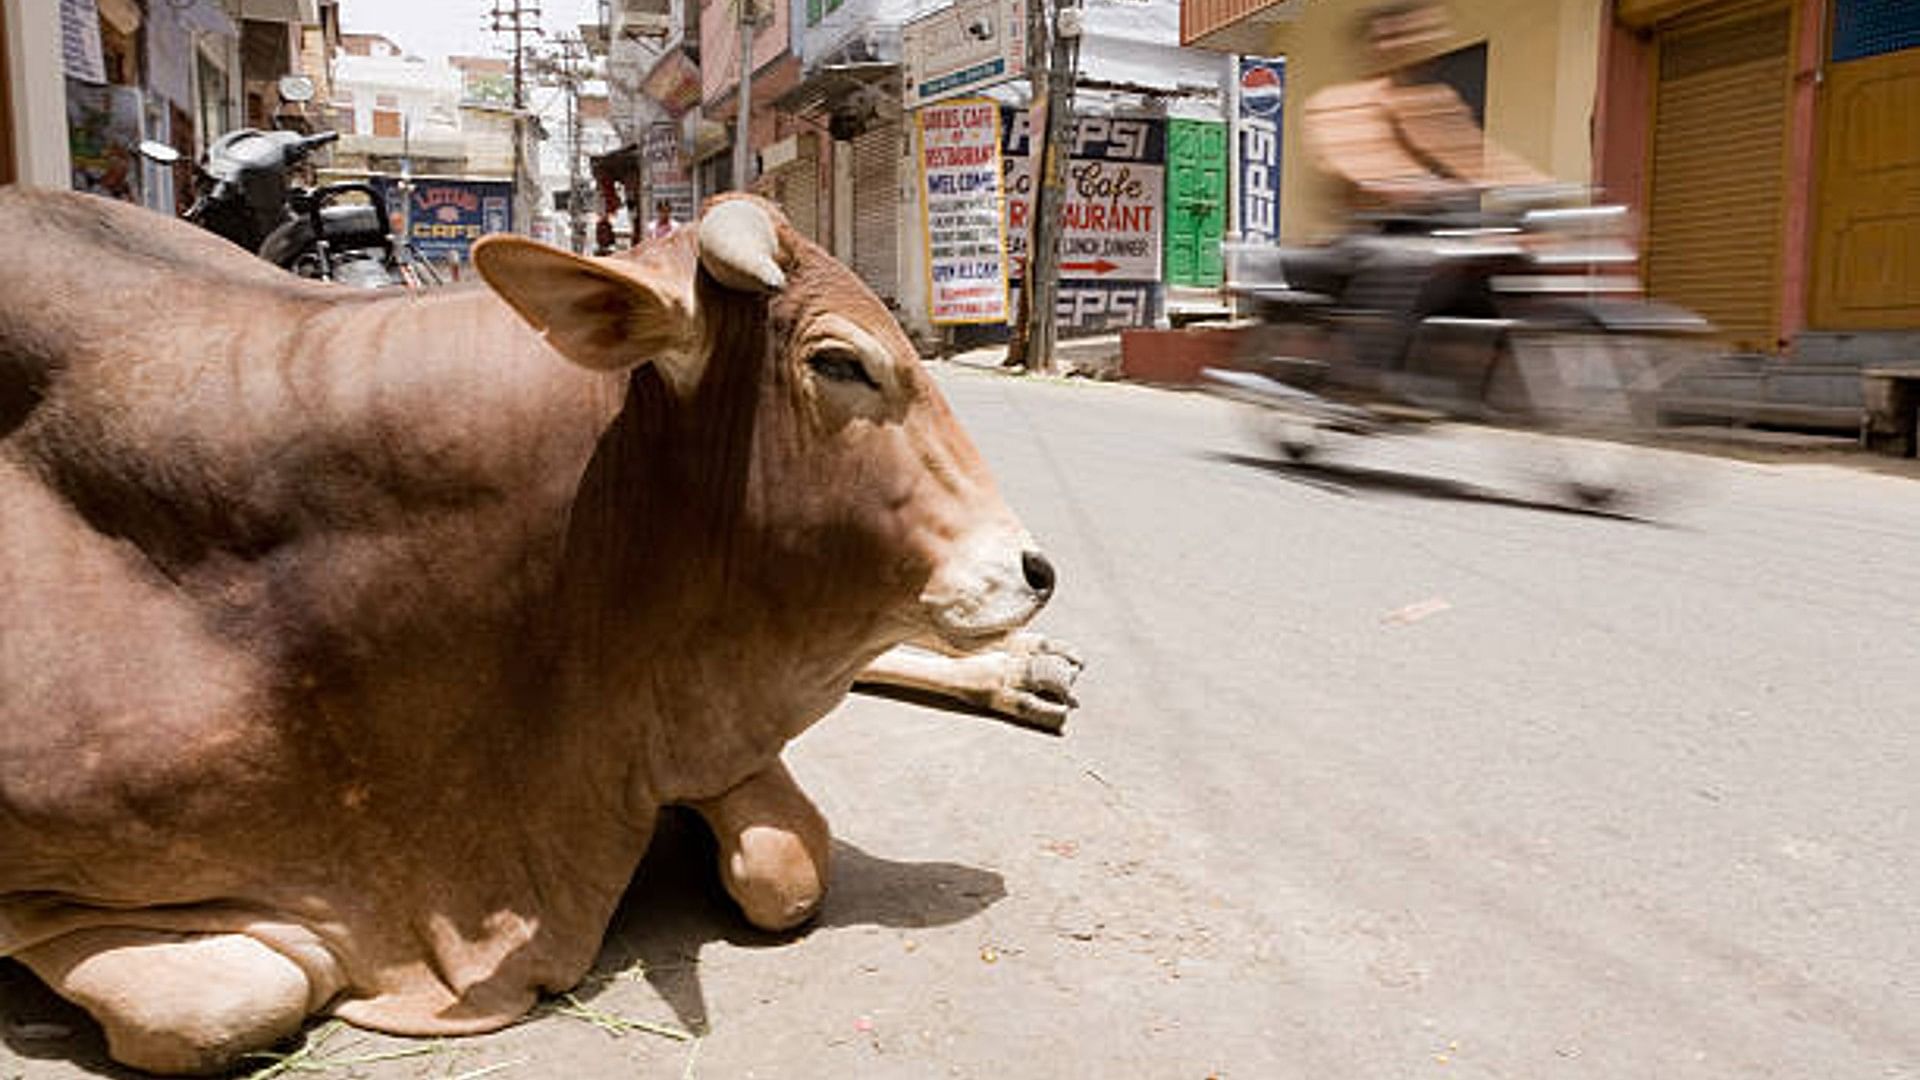 police arrested a cow on the charge of murder, know the whole matter